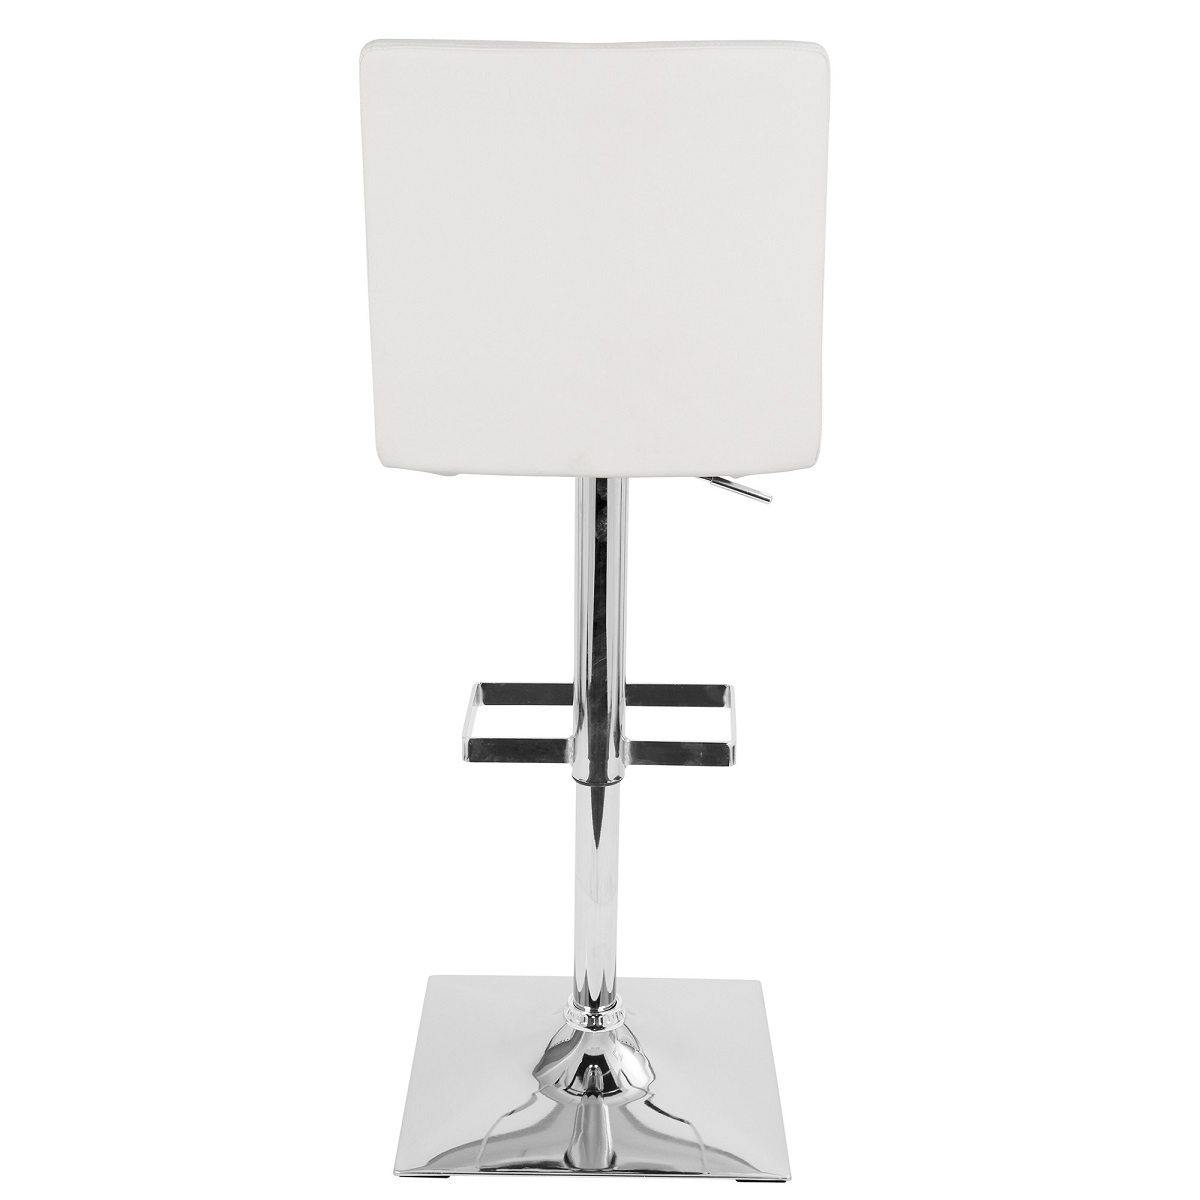 Contemporary Home Living 45" White Faux Leather Silver Adjustable Indoor Barstool